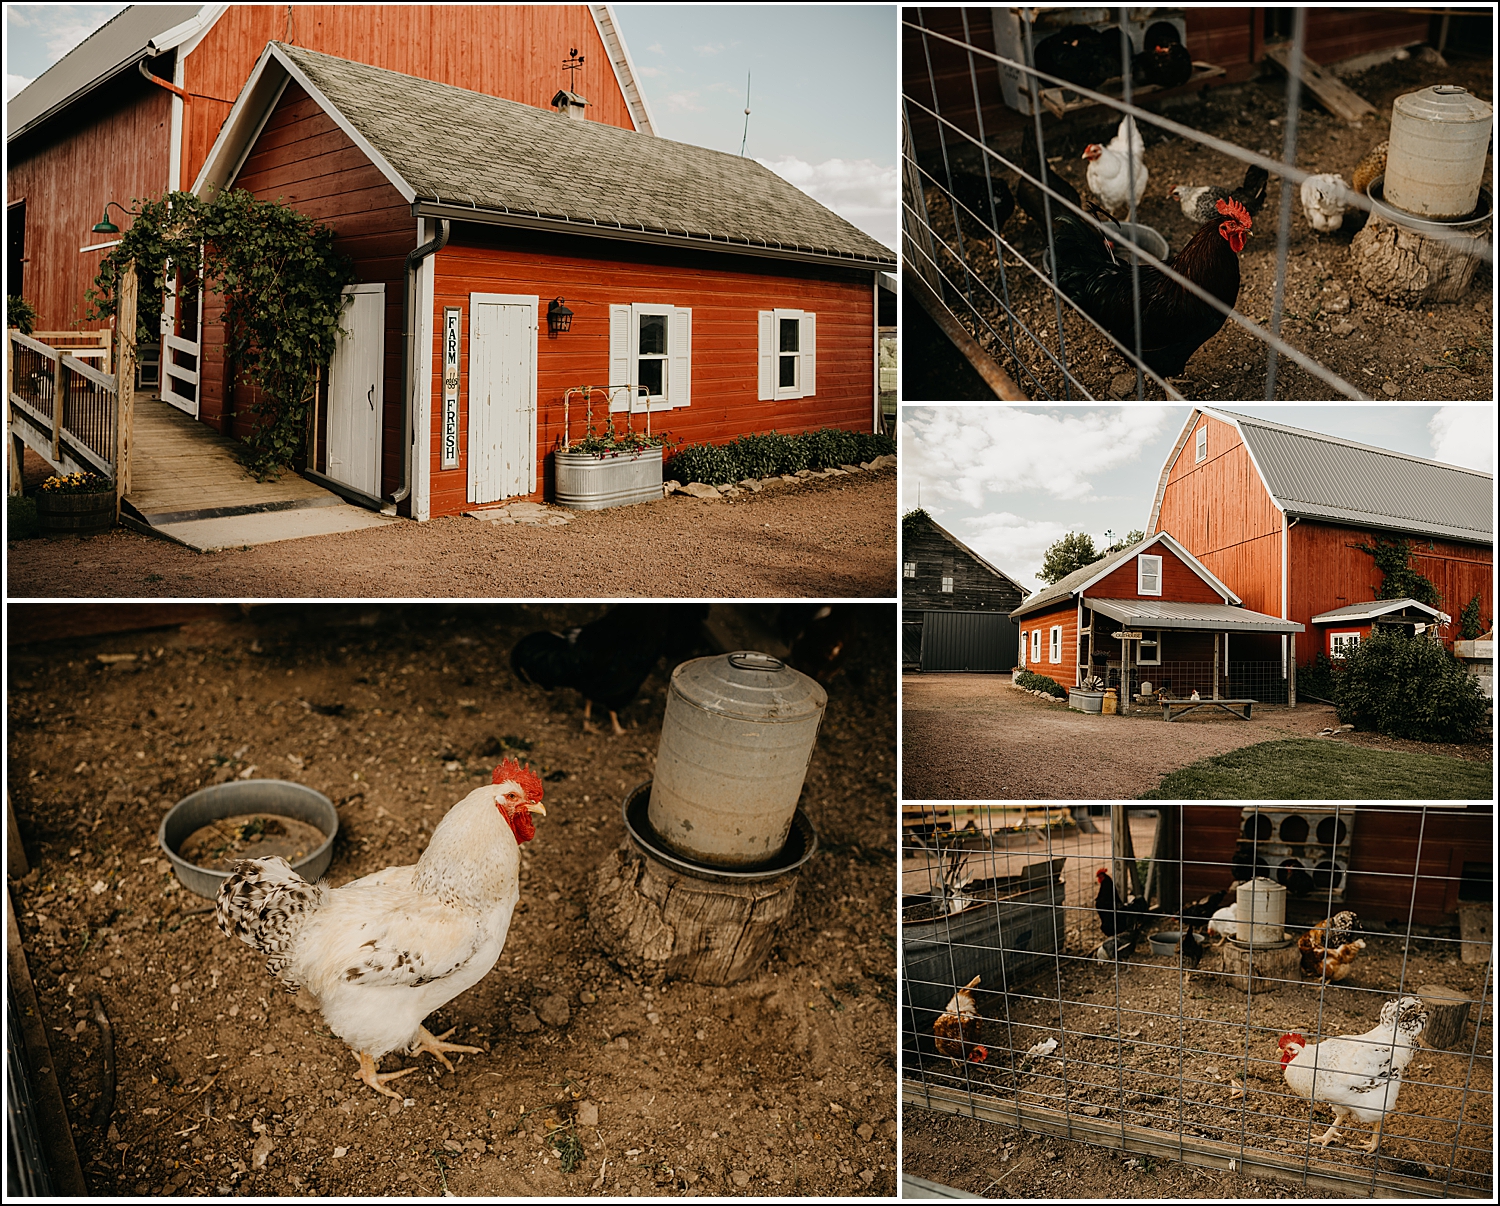 Tansy Hill Farm Wisconsin venue with chickens Wausau